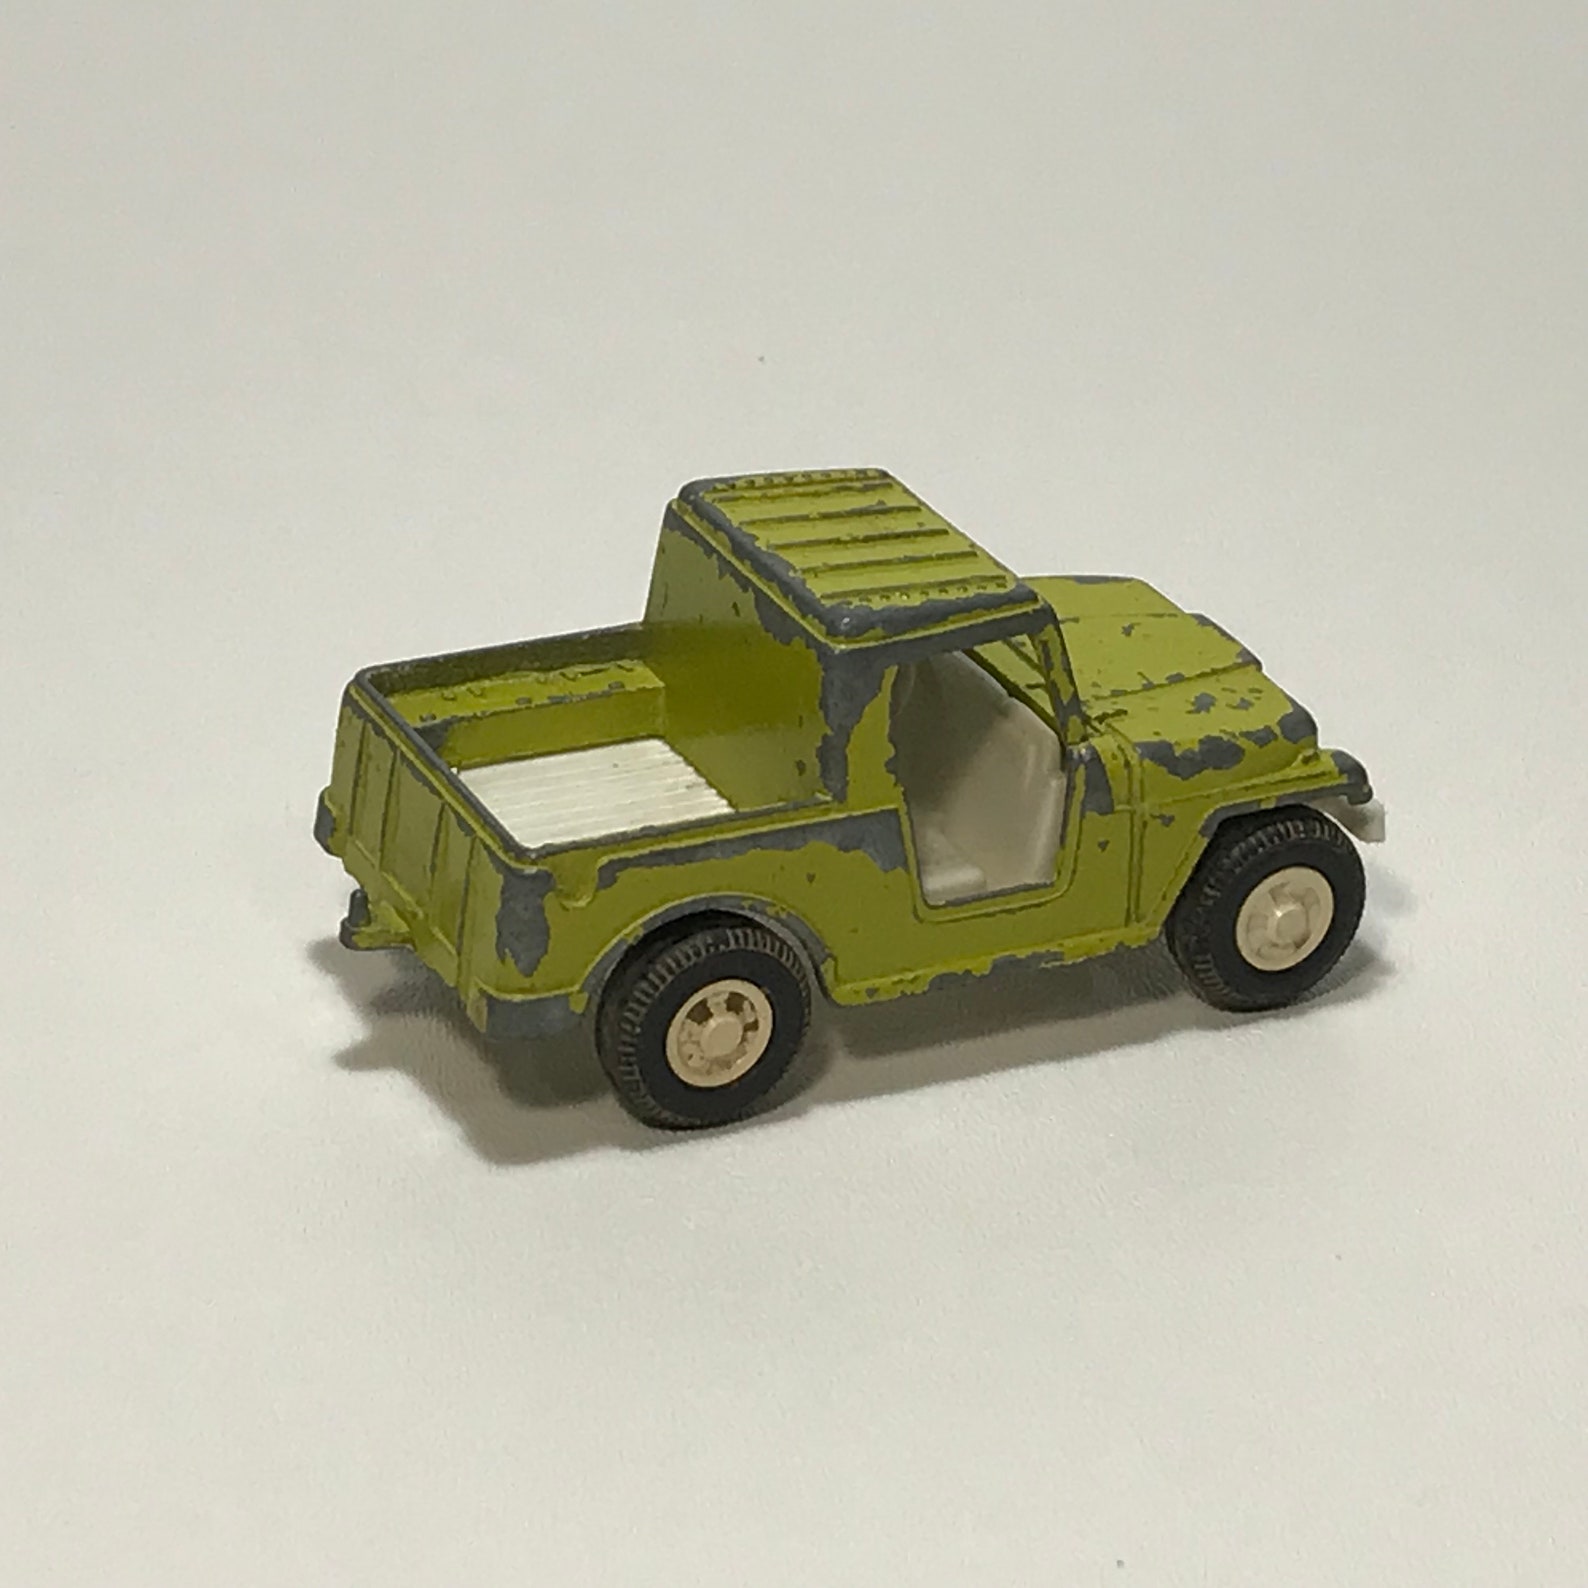 Vintage Tootsietoy Diecast 1969 Lime Green Jeep W/hitch - Etsy